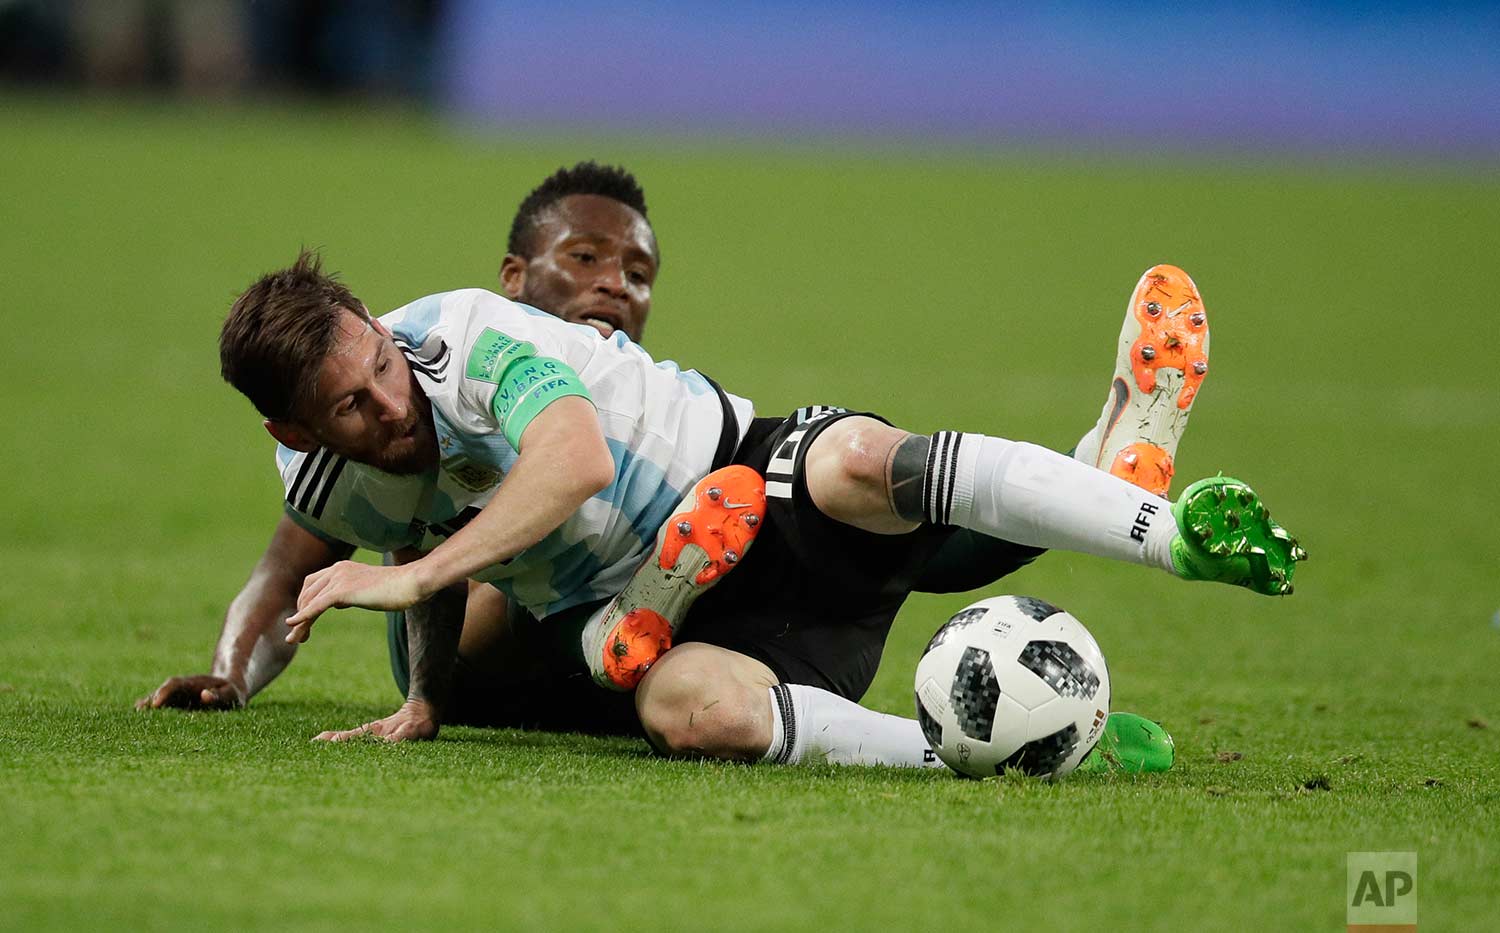  Argentina's Lionel Messi, foreground, and Nigeria's John Obi Mikel compete for the ball during the group D match between Argentina and Nigeria at the 2018 soccer World Cup in the St. Petersburg Stadium in St. Petersburg, Russia, Tuesday, June 26, 20